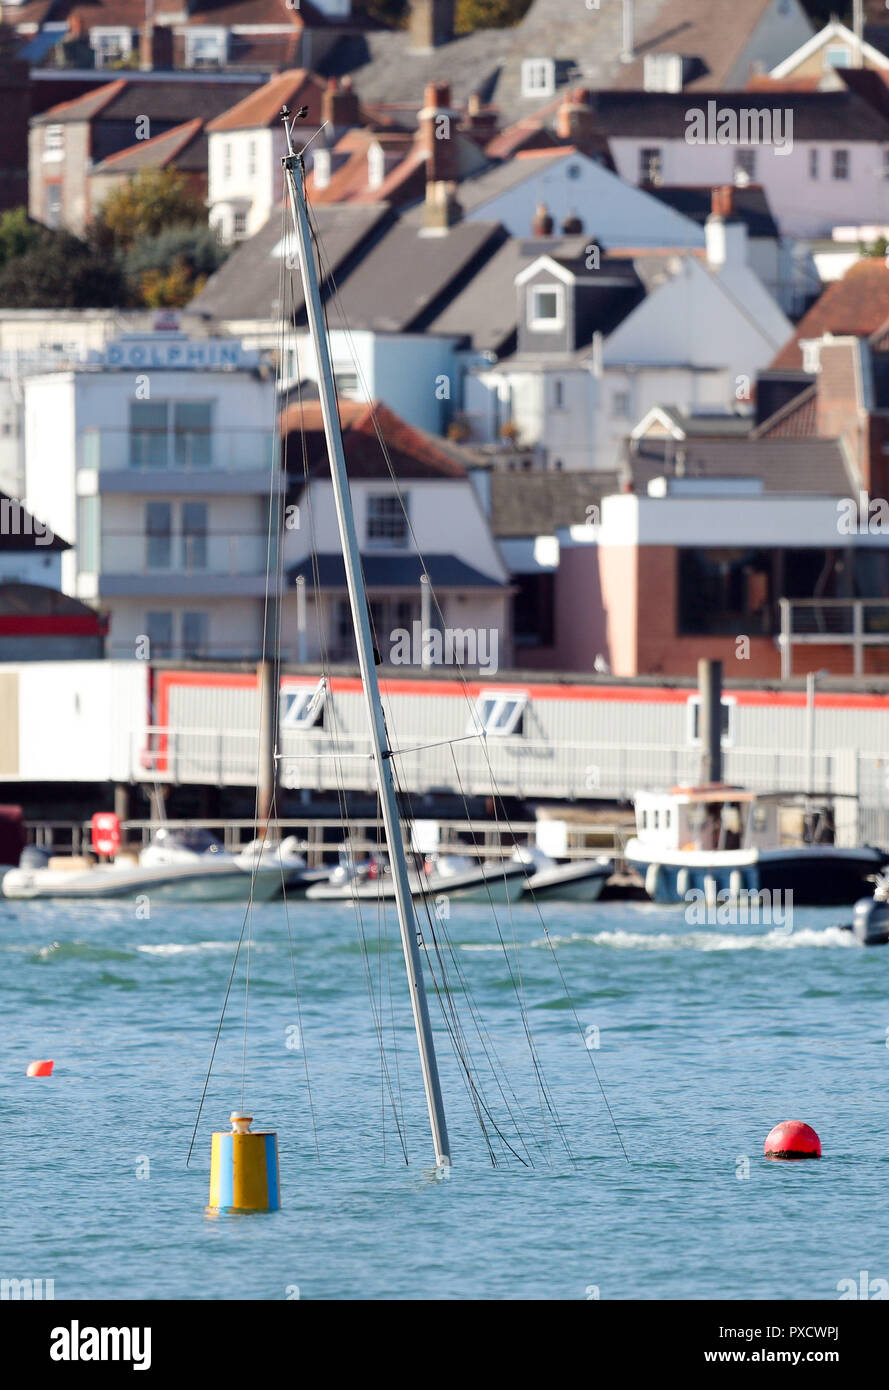 The mast of a submerged yacht in Cowes harbour on the Isle of Wight after it was involved in an incident with the Red Funnel car ferry, Red Falcon, which collided with several small boats due to bad weather. Stock Photo